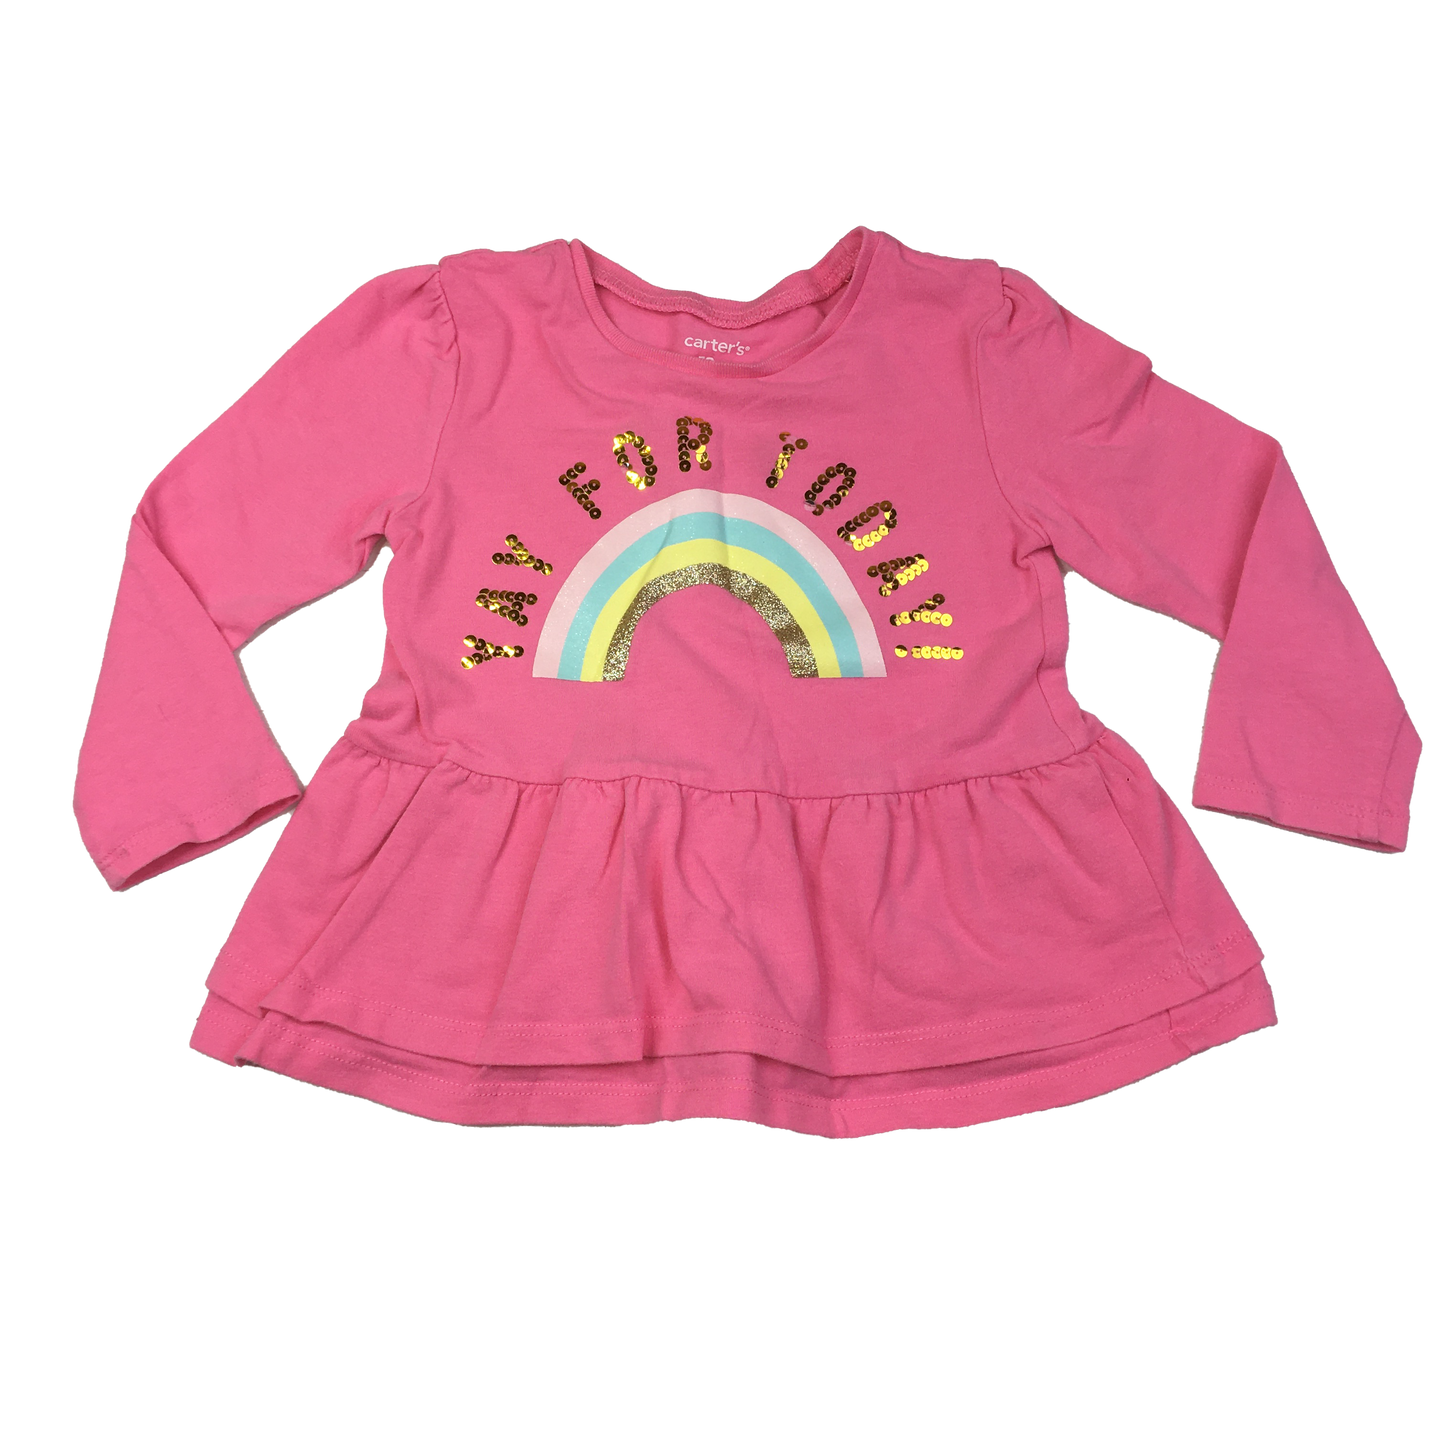 Carter's Pink Long Sleeve with Sequins "Yay For Today" 18M